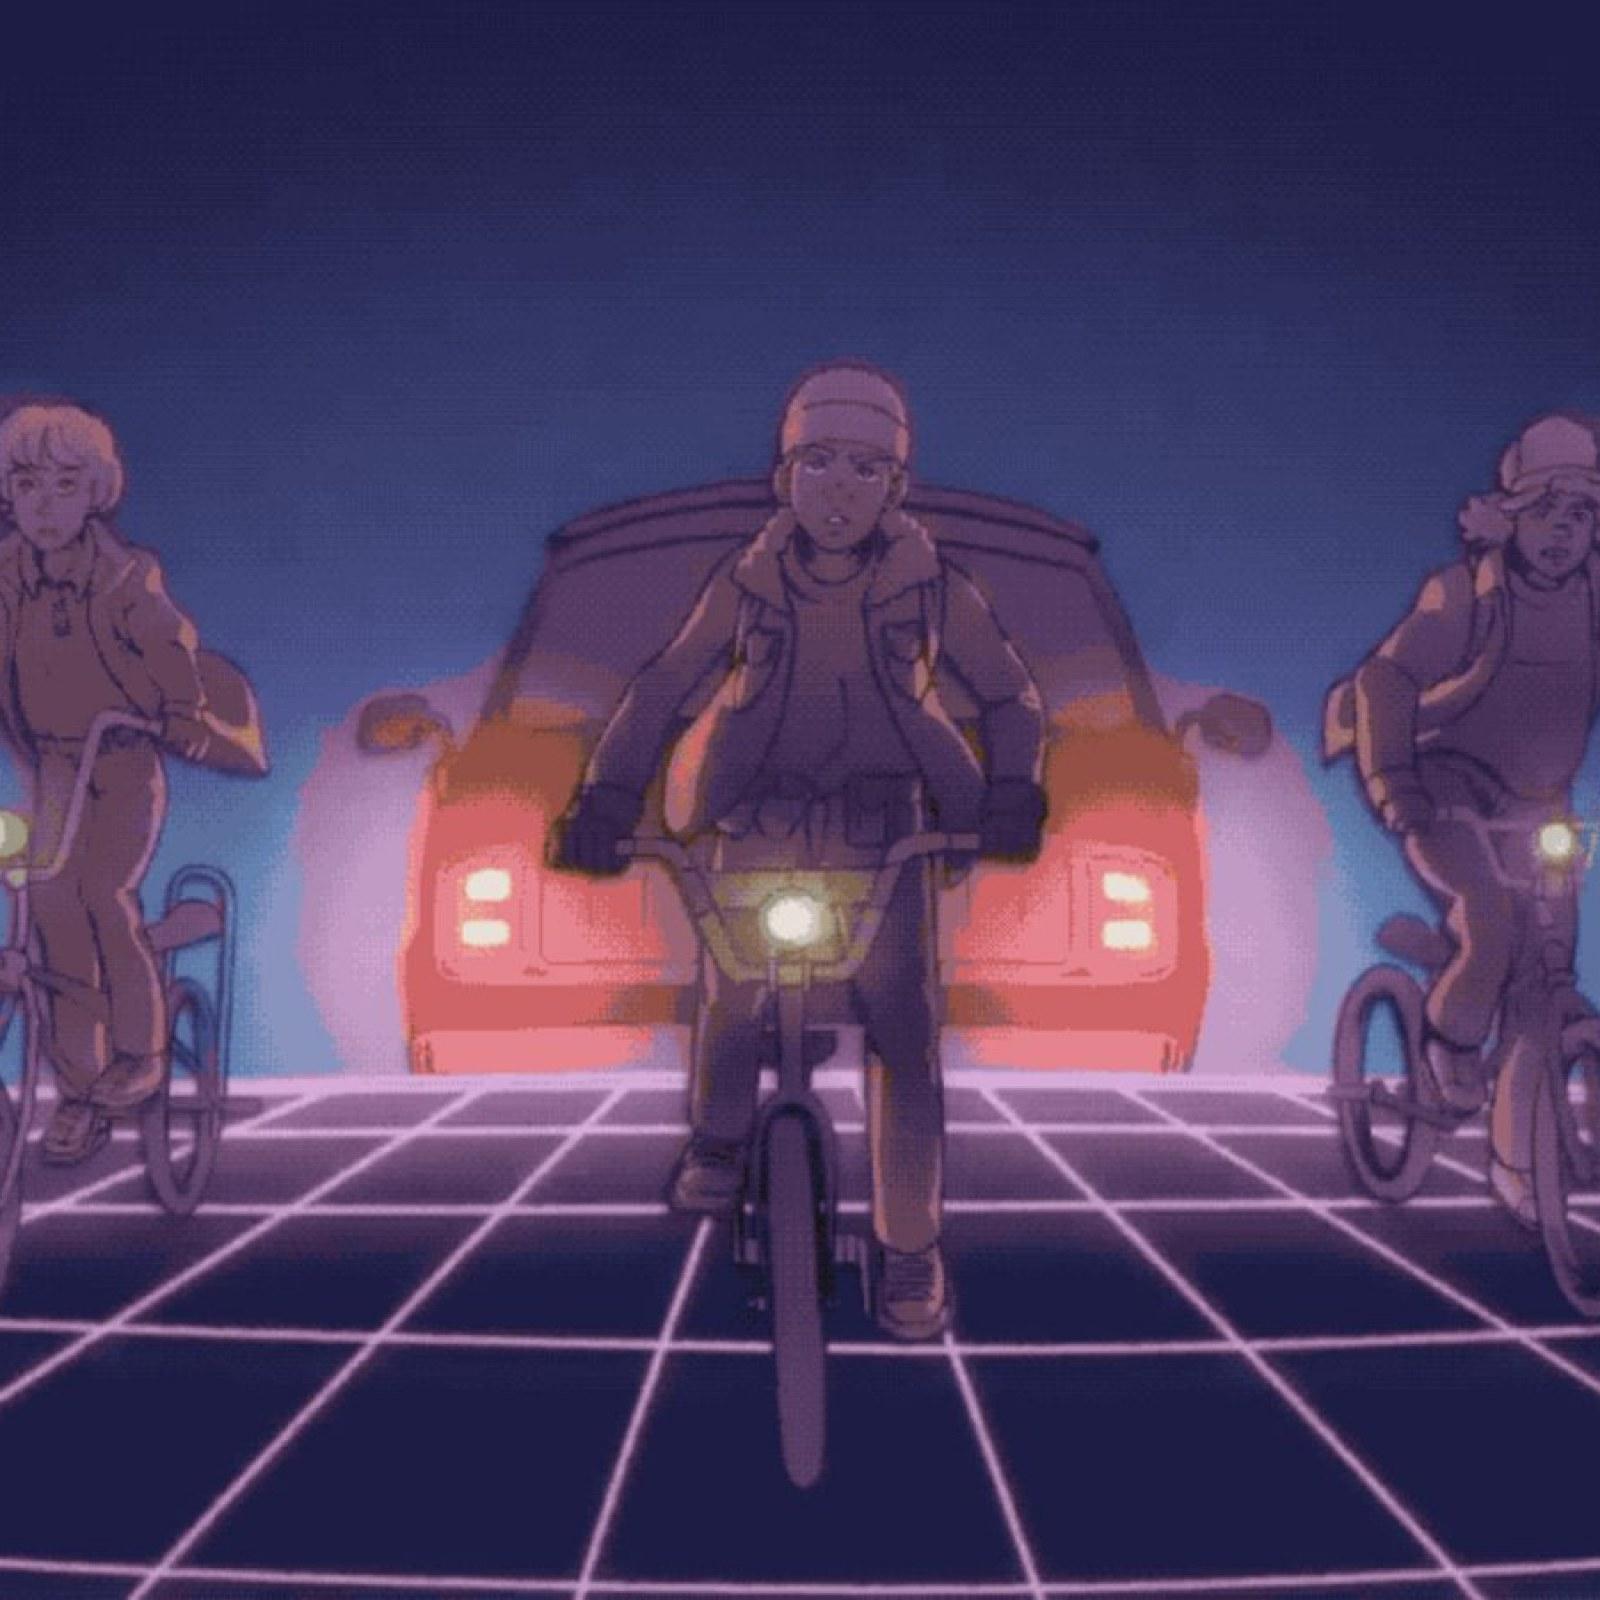 Stranger Things' Anime Influence Is More Than Just A Viral Short